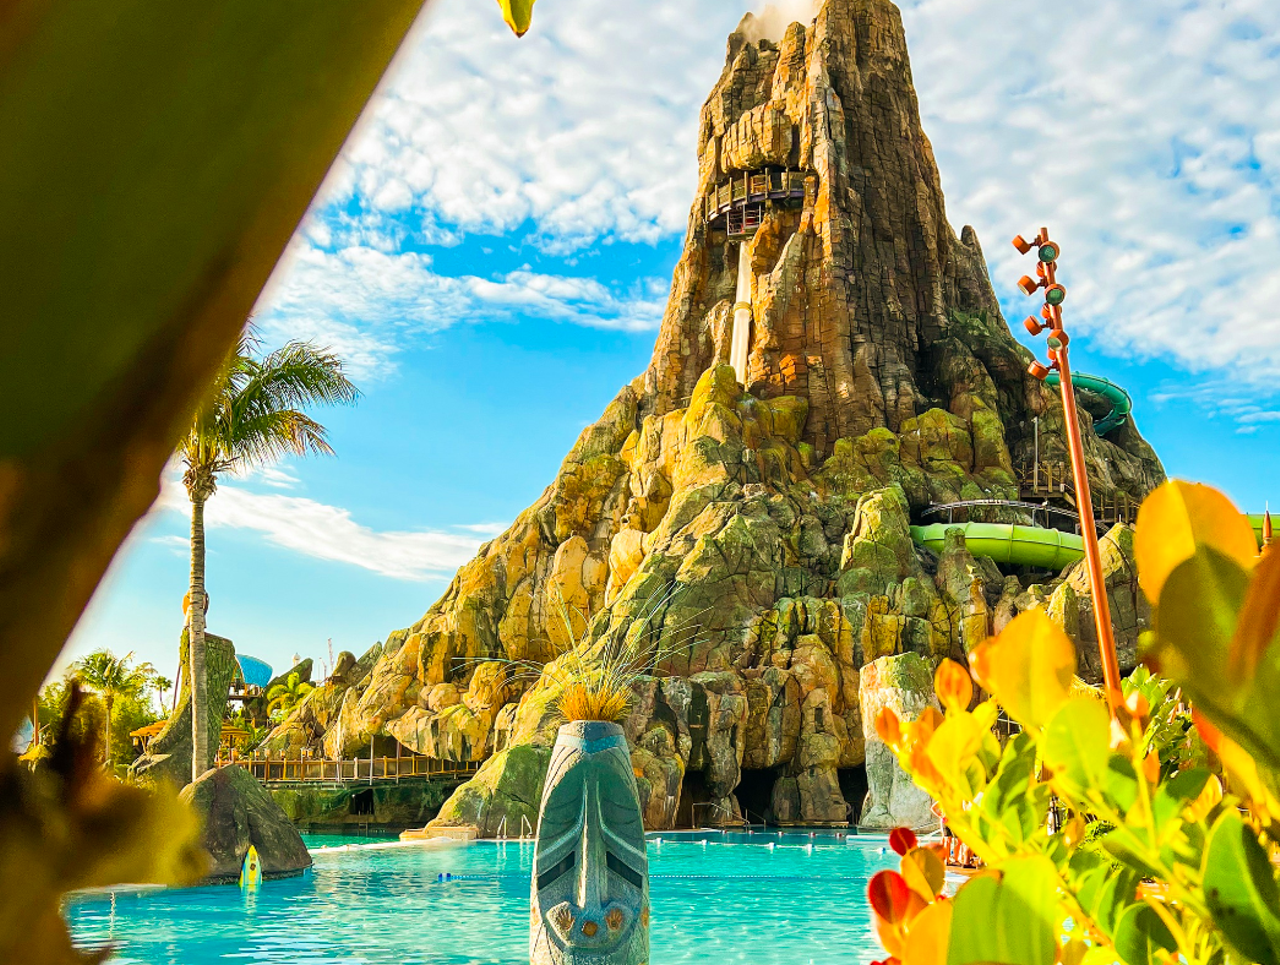 Dropping a check on a private cabana at Volcano Bay
Prices vary, but we're sure they're always high and rarely worth it. Opt for a regularly reserved cabana instead.